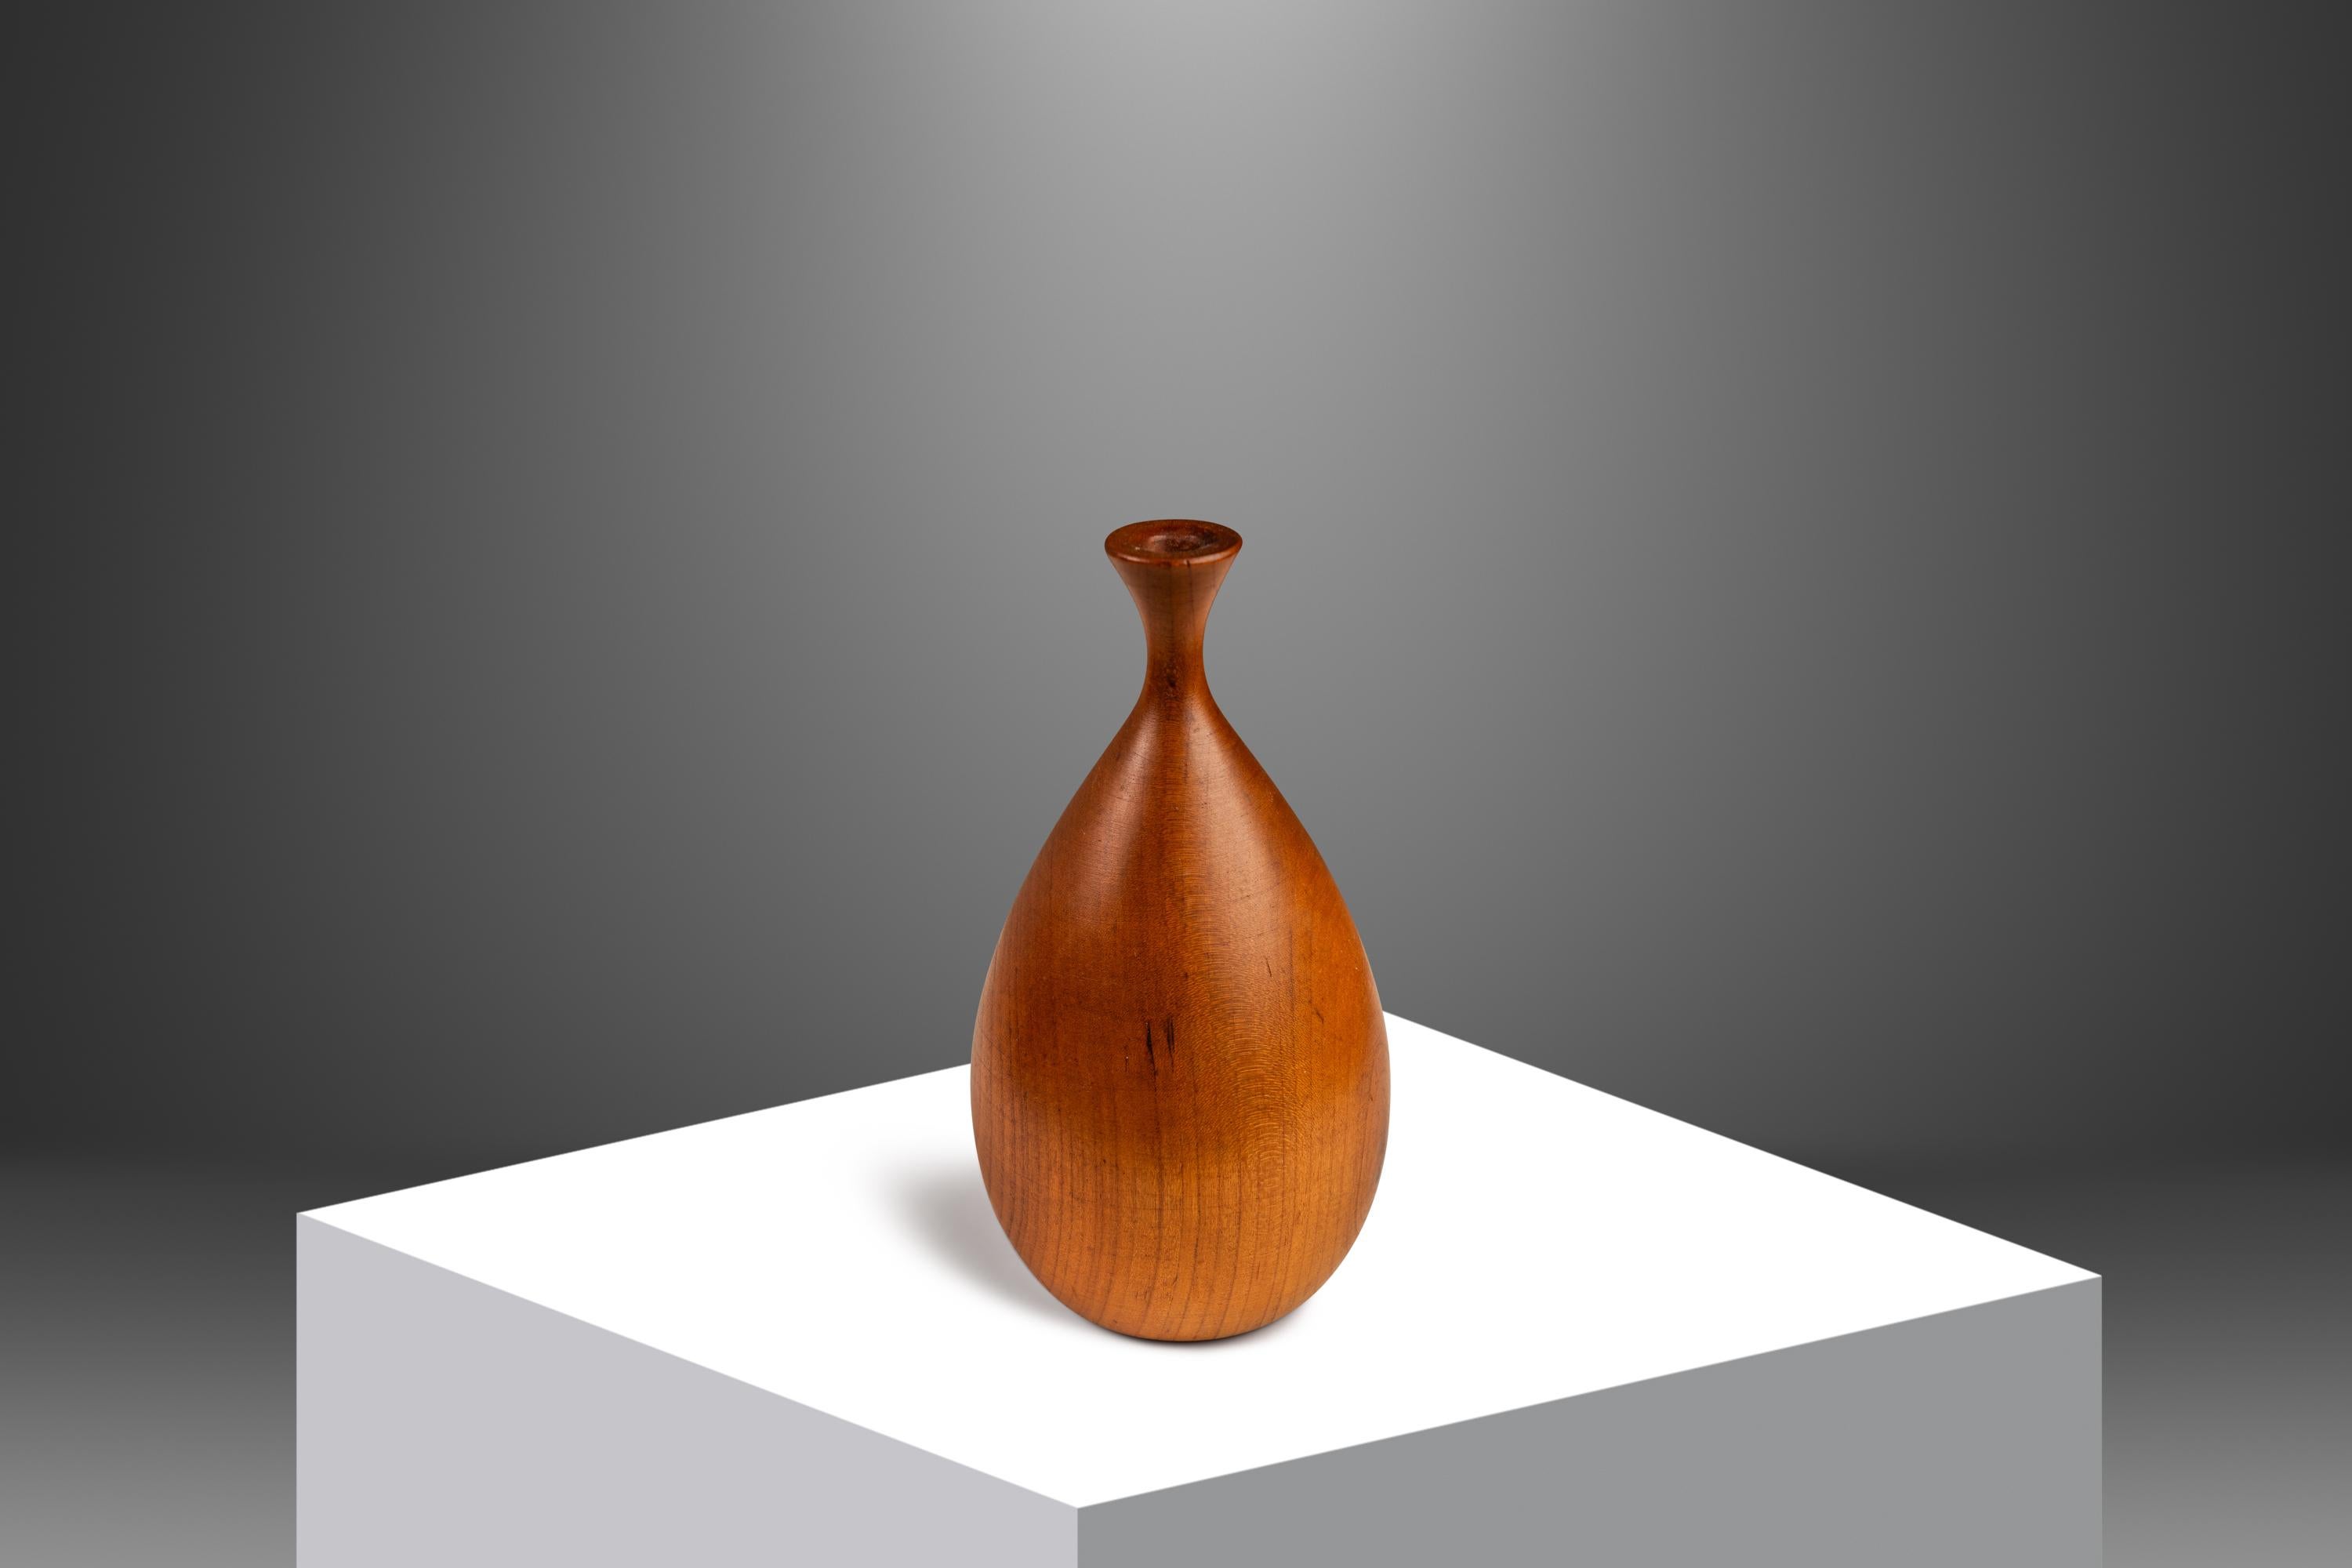 Signed Petite Wood-Turned Vase in solid Walnut by George Biersdorf, USA, c. 1979 In Good Condition For Sale In Deland, FL